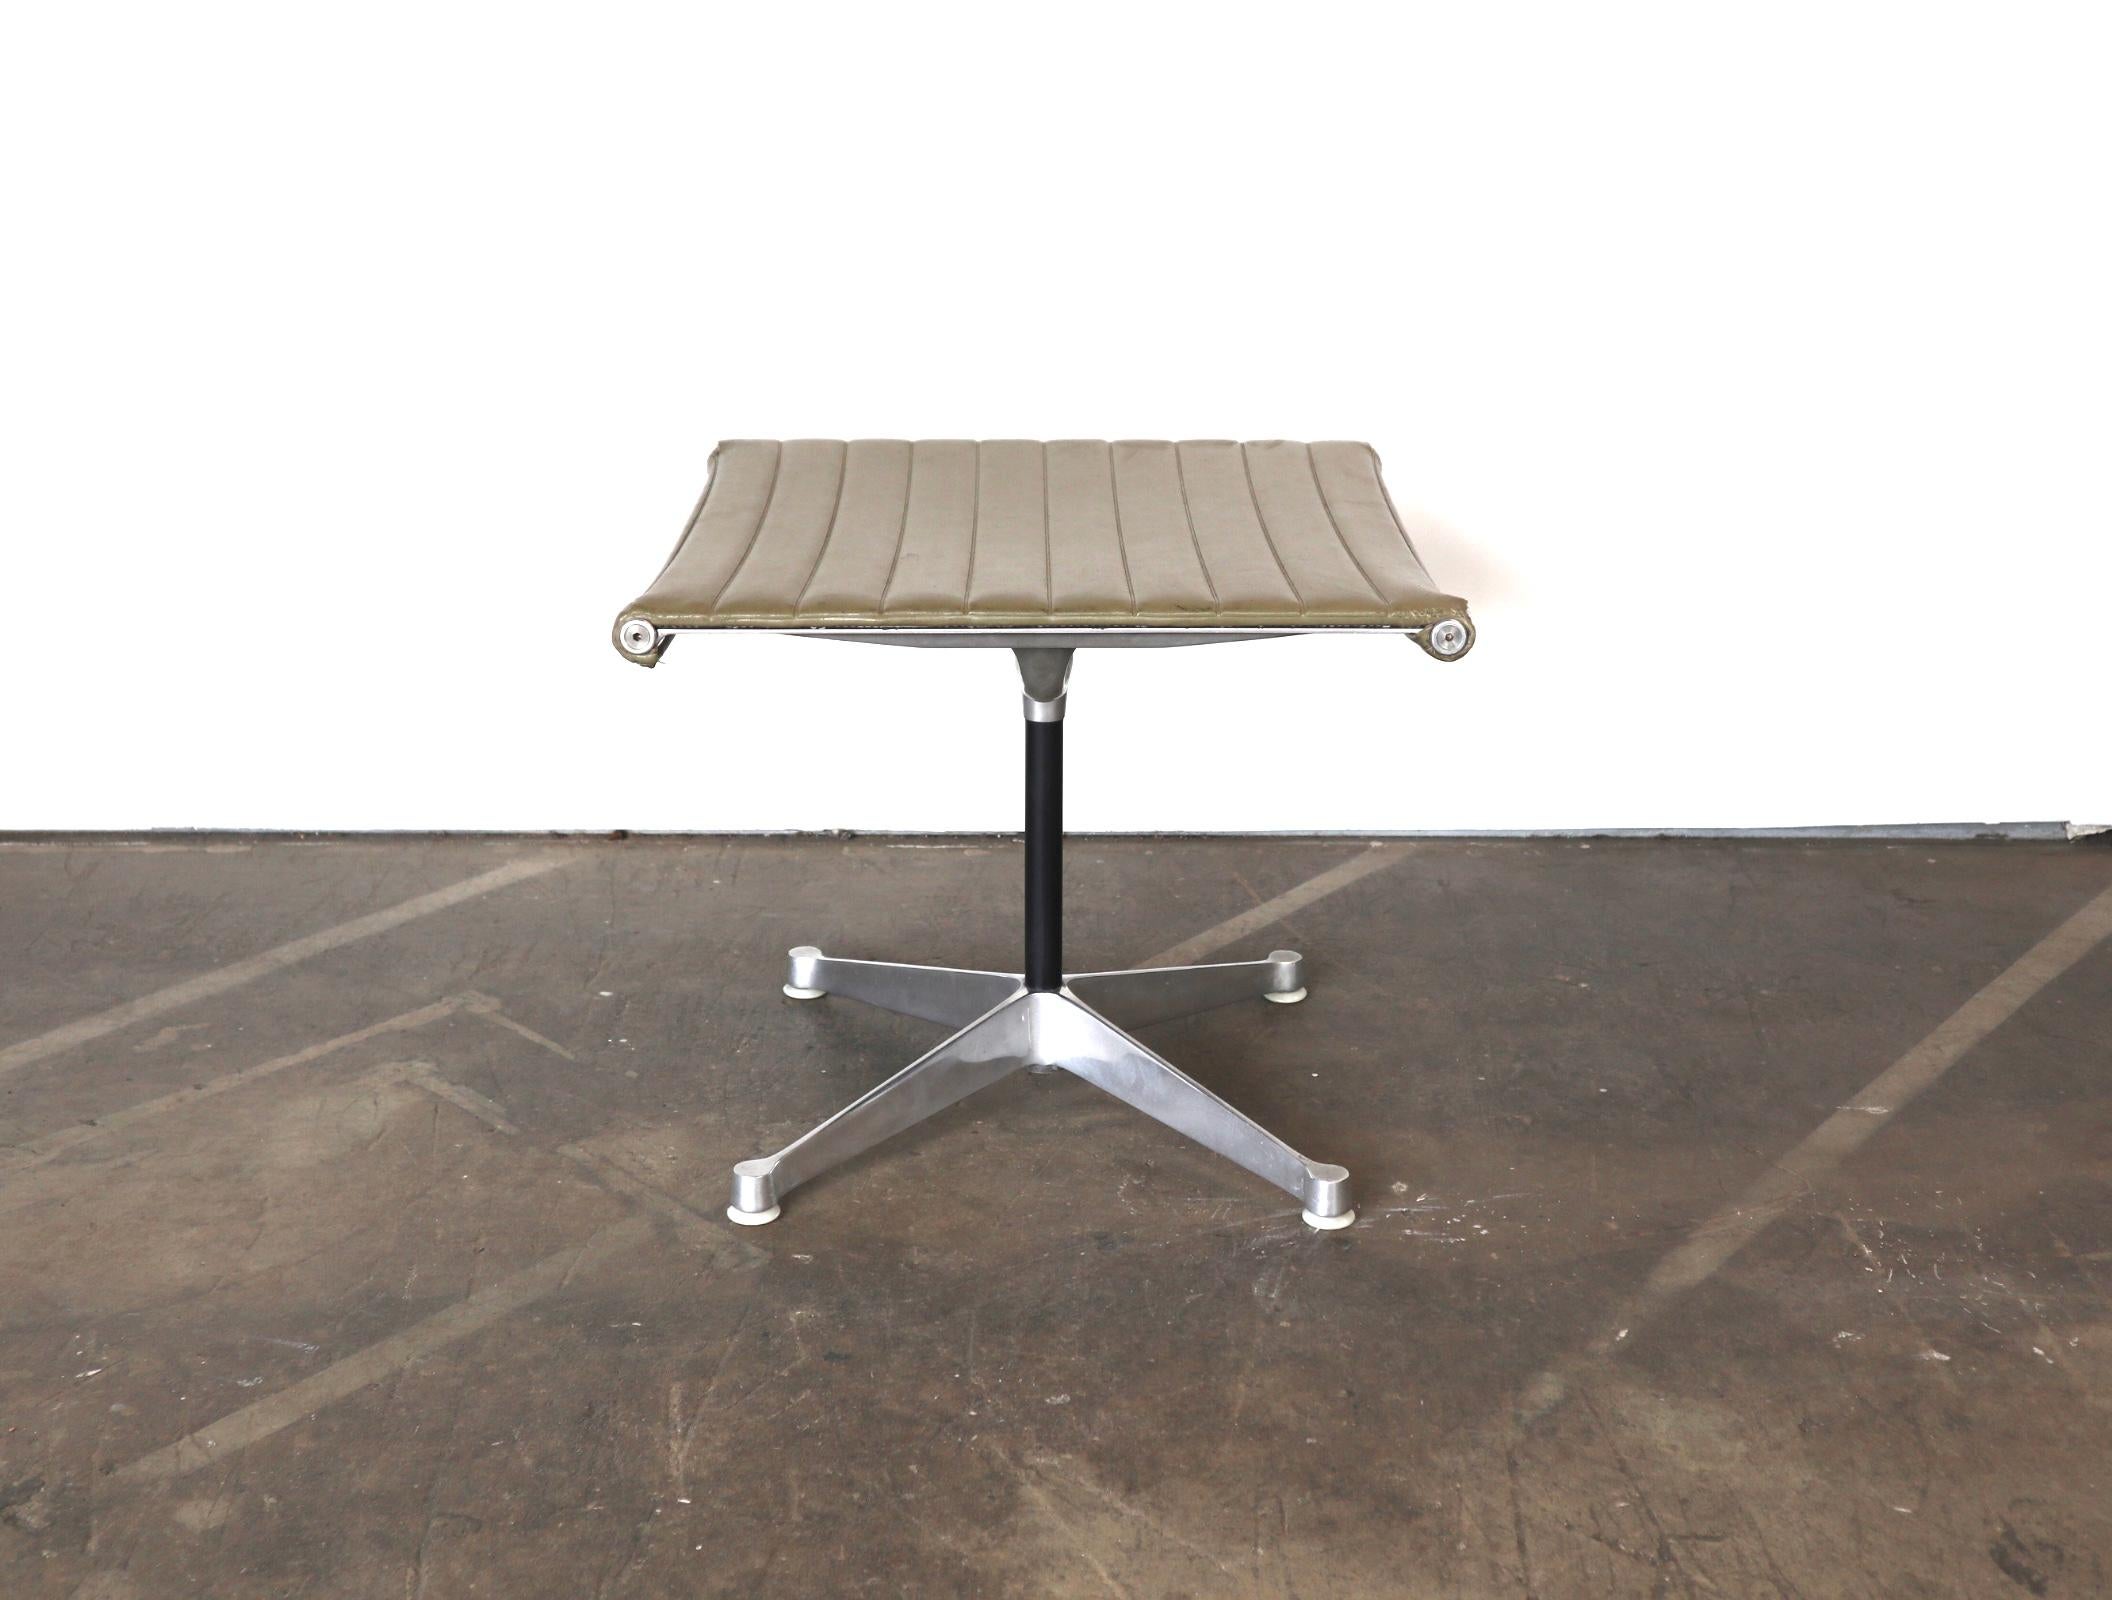 Gorgeous vintage ottoman designed by Charles and Ray Eames for the Herman Miller aluminum group series. Olive naugahyde upholstery in good condition with normal wear. Polished aluminum presents well and the base is stamped Herman Miller. All